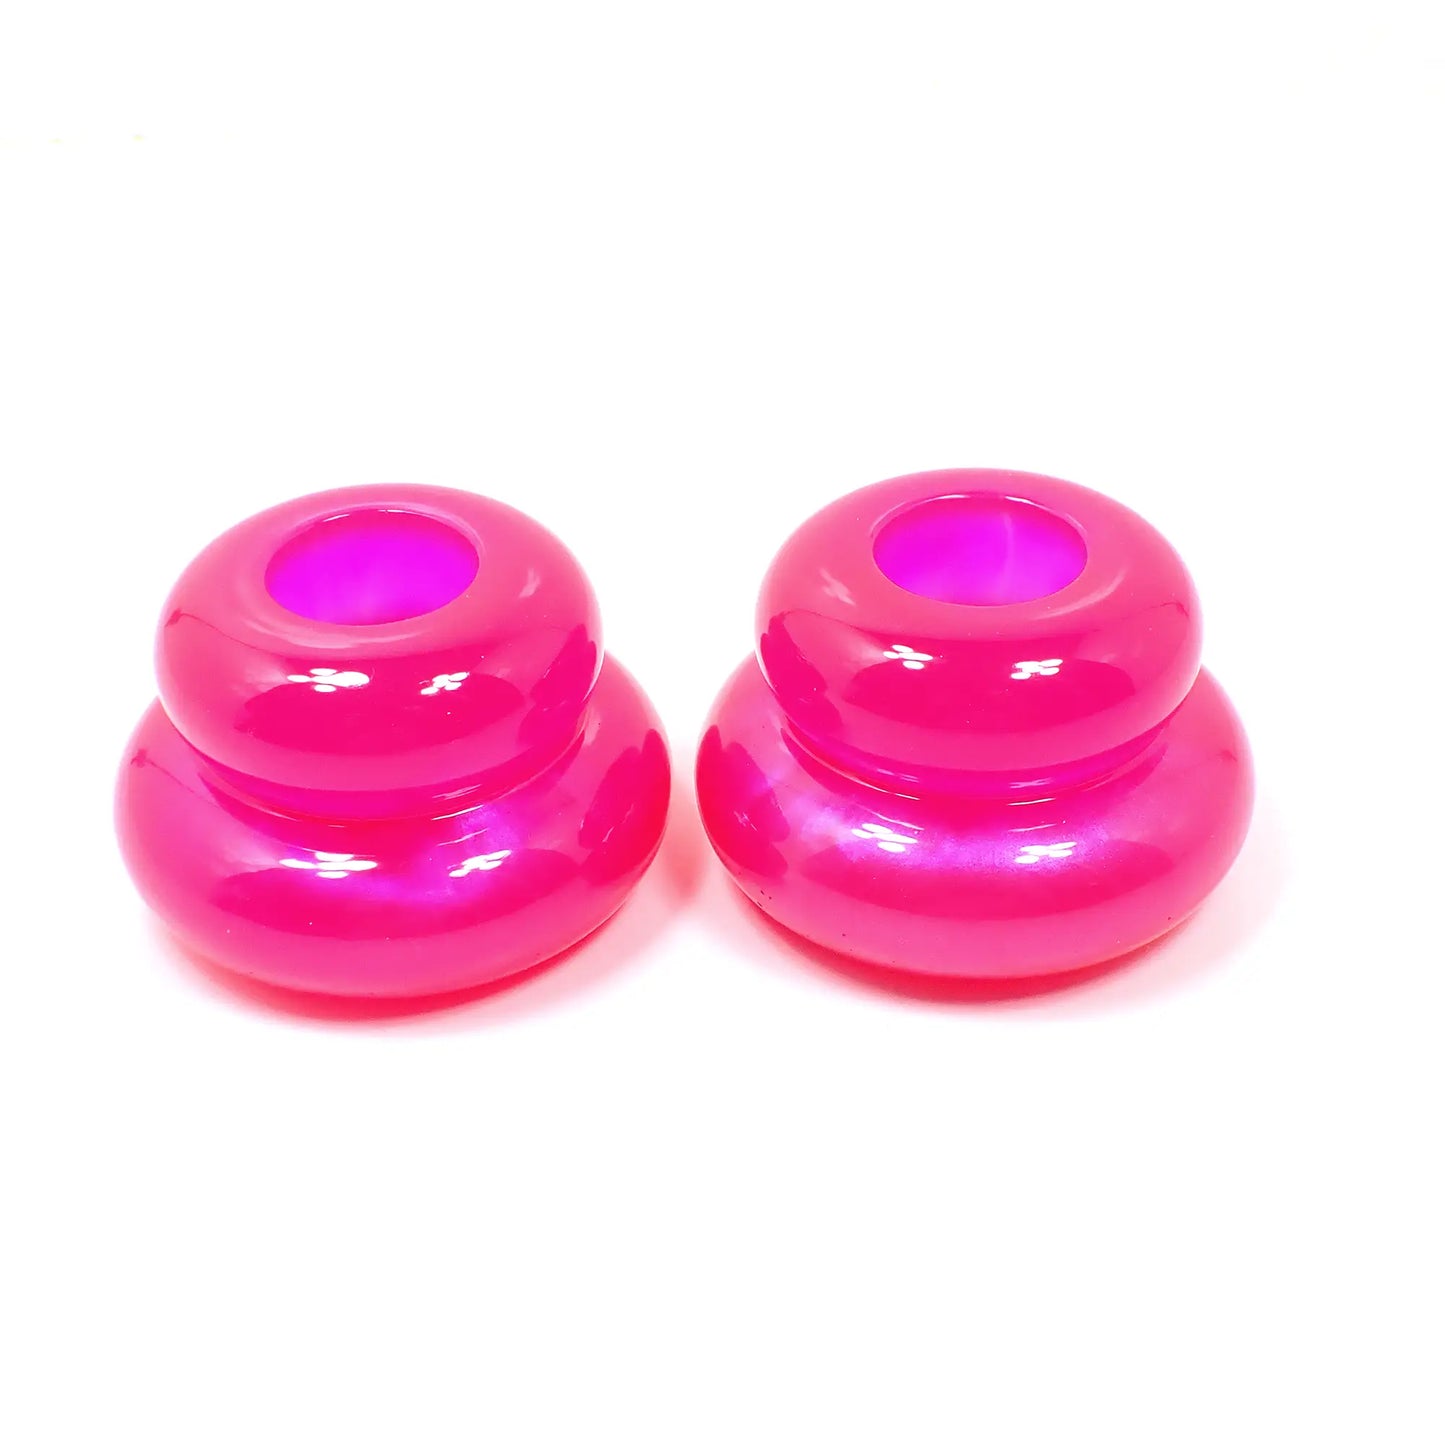 Set of Two Bright Neon and Pearly Pink Resin Handmade Puffy Round Double Ring Candlestick Holders